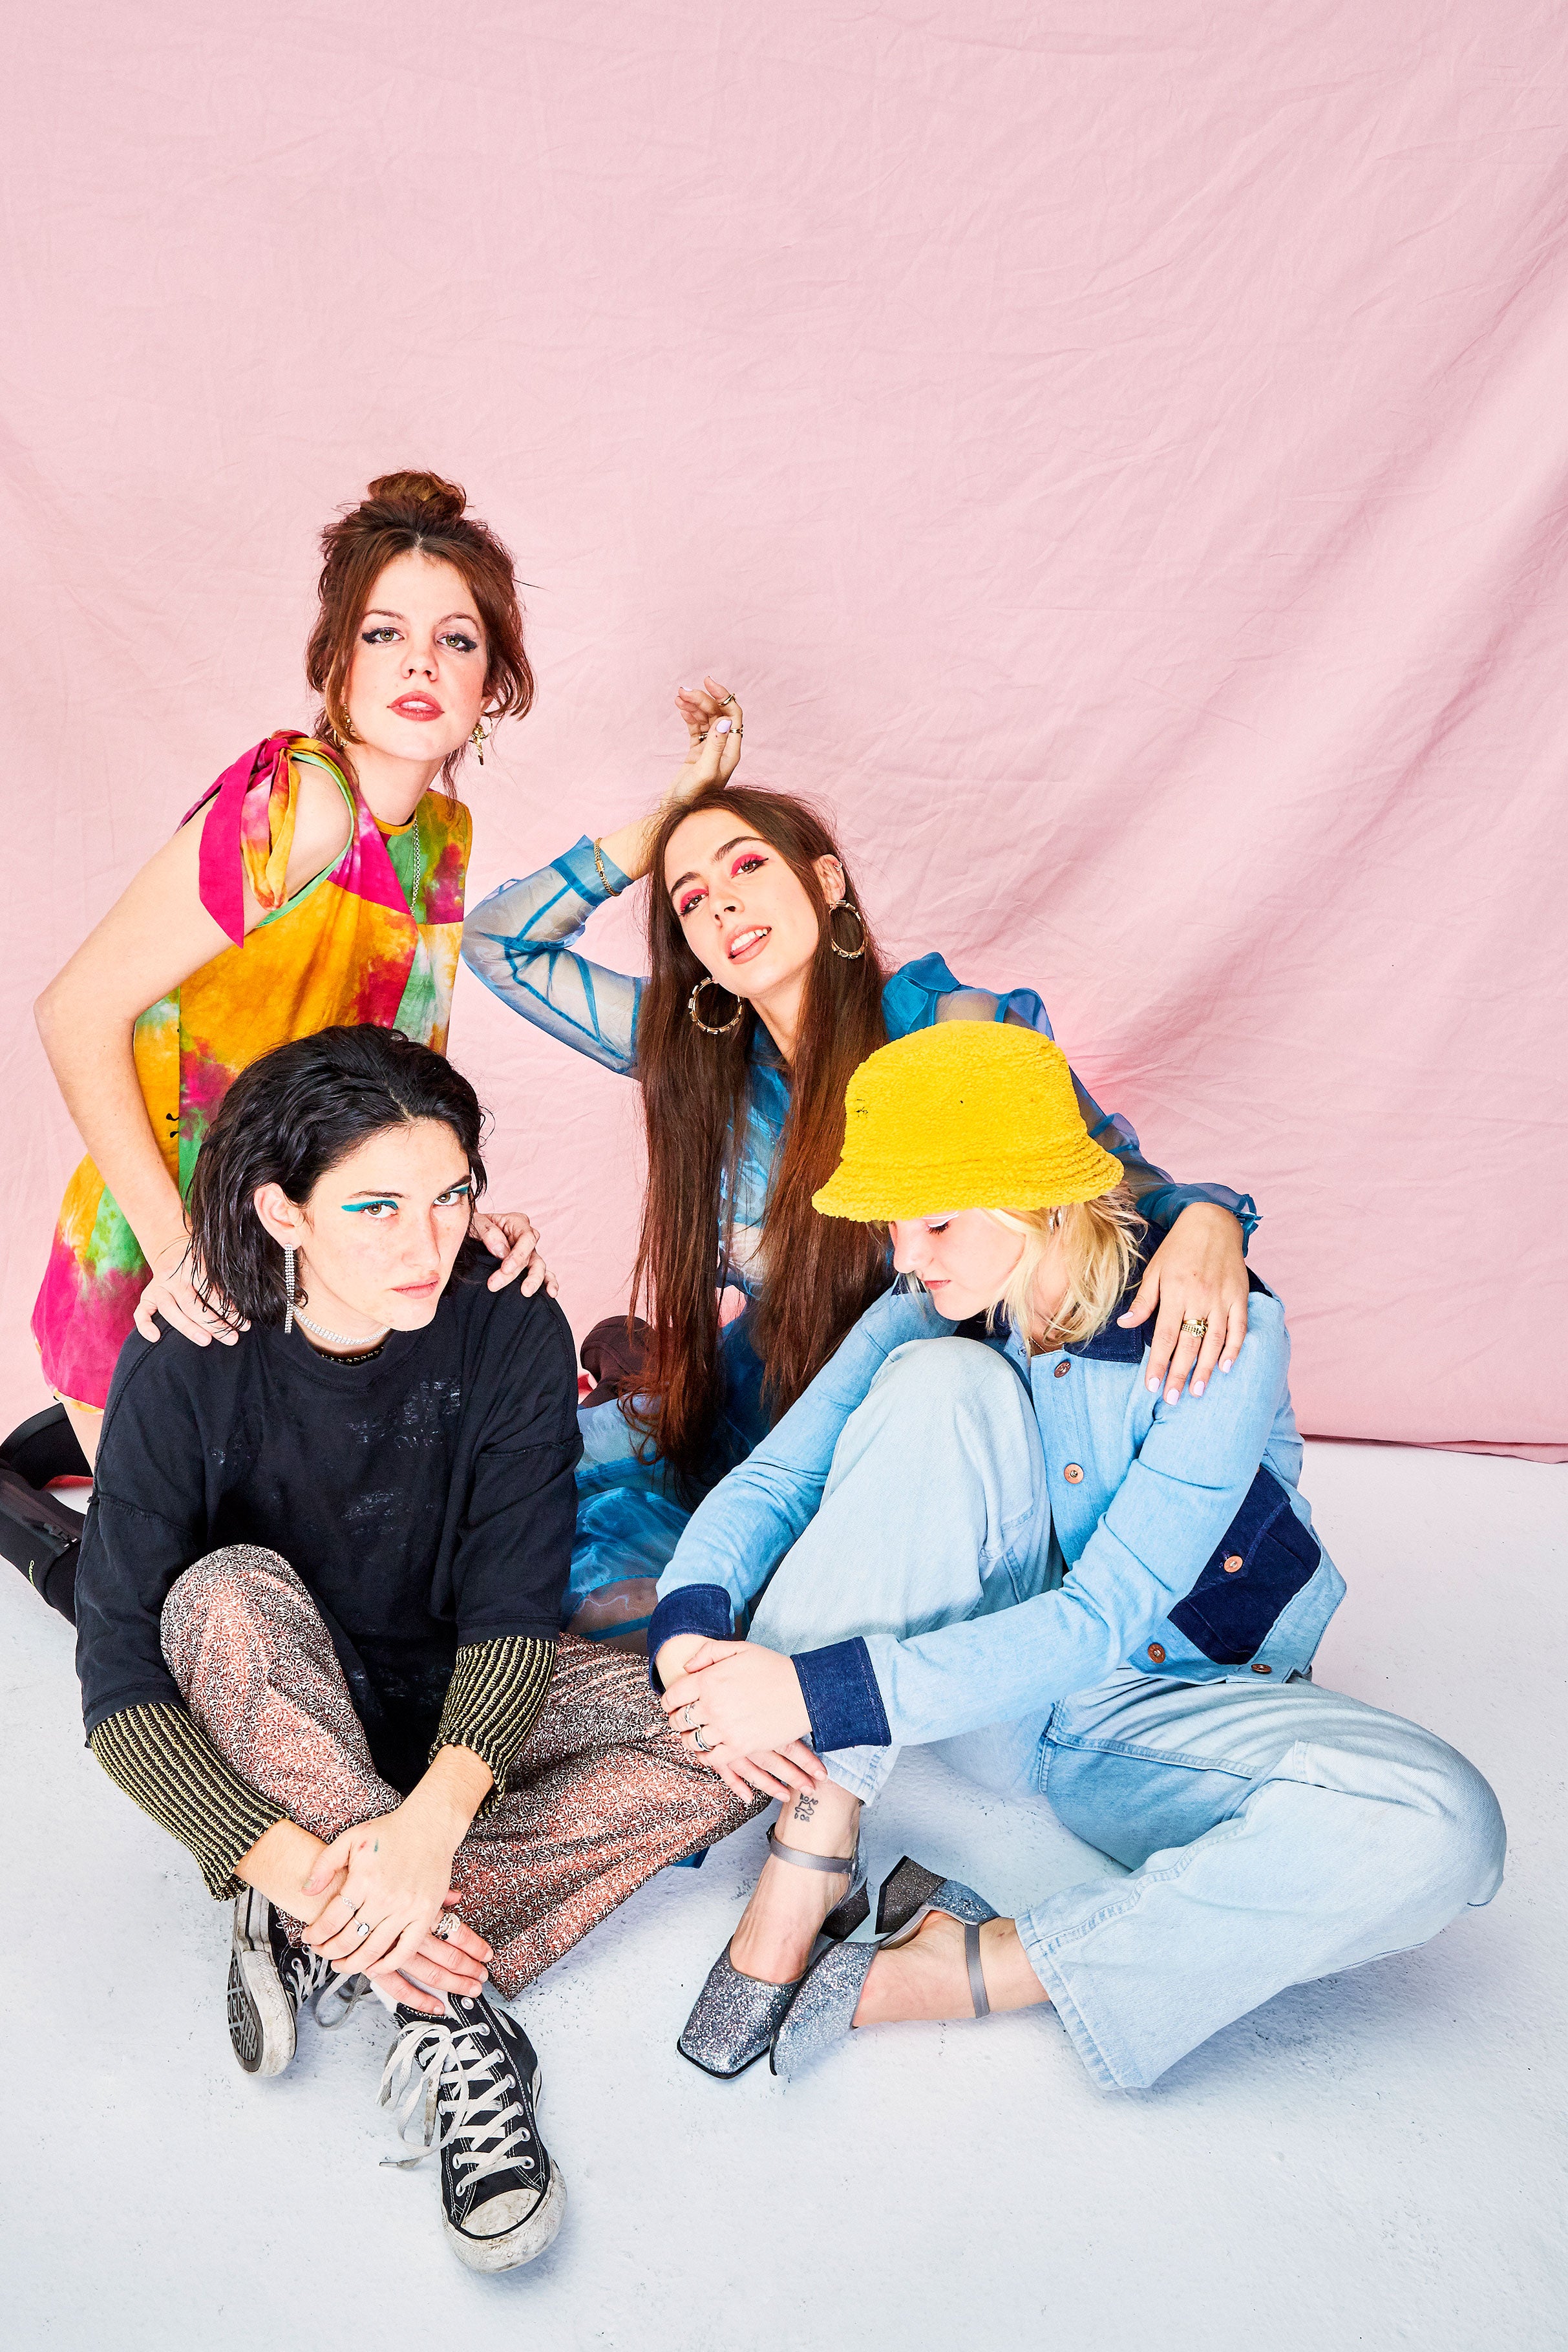 Hinds (Matinee Show)